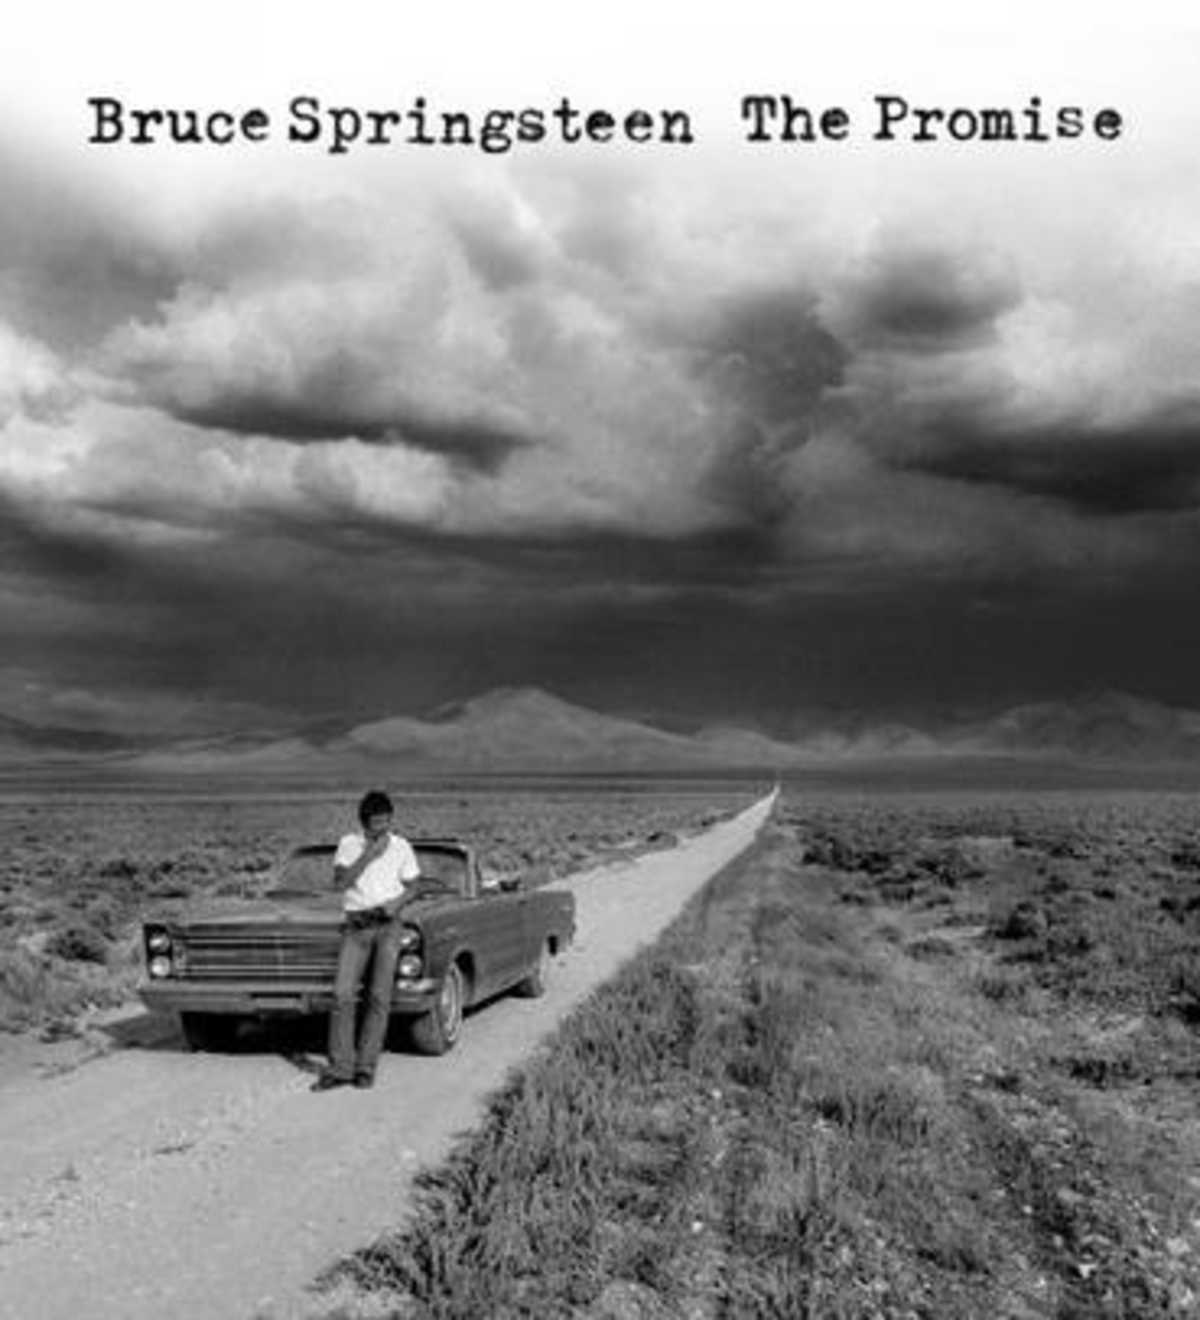 Bruce Springsteen - The Promise (The Lost Sessions: Darkness On The Edge of Town)